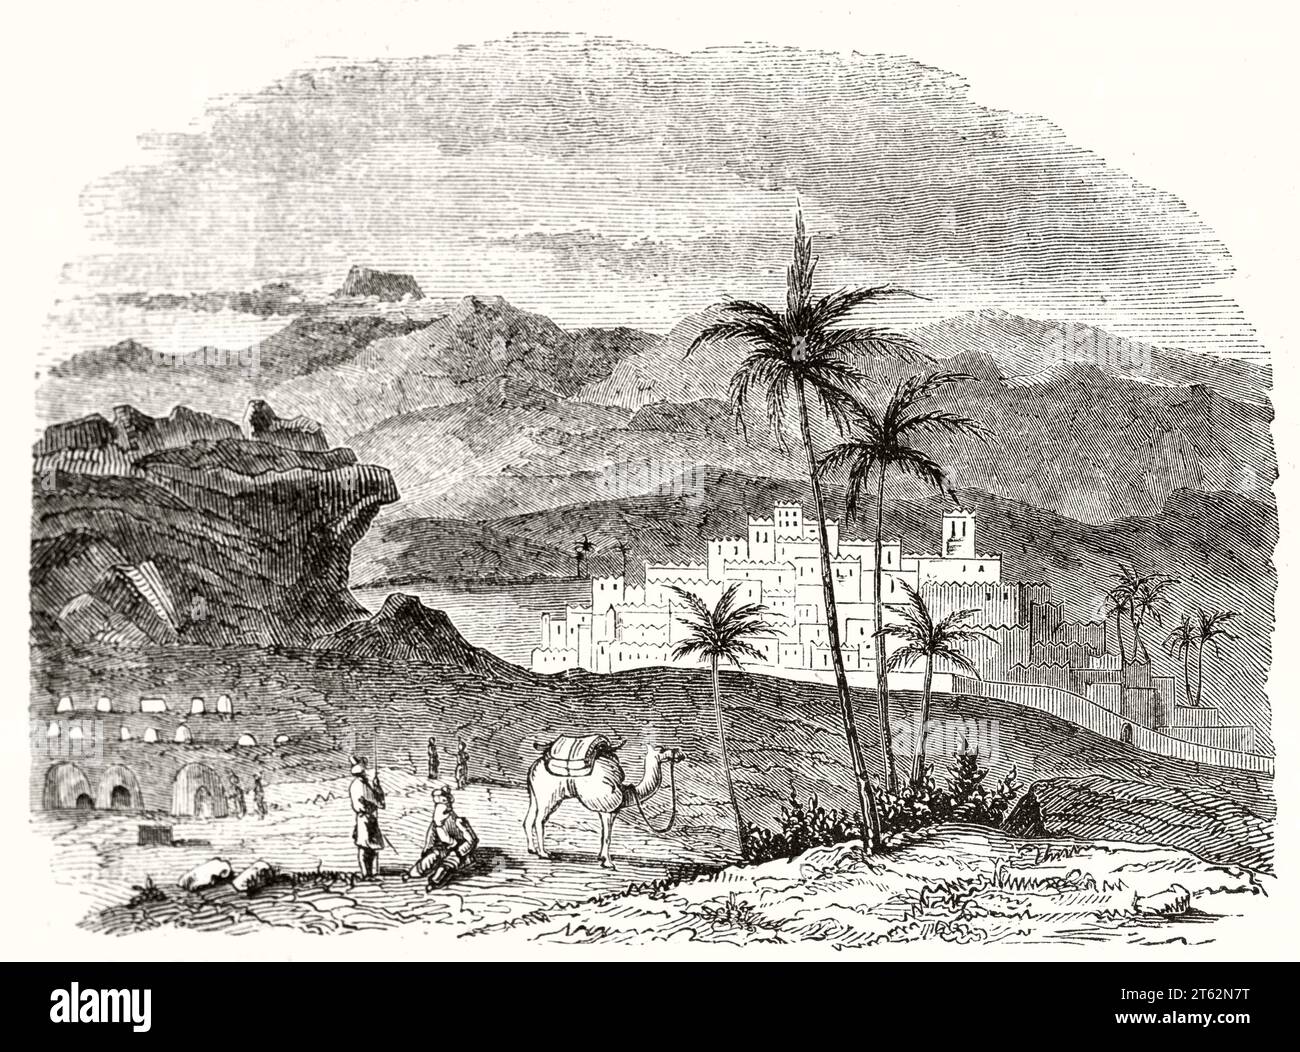 Old view of Ghrat (?) central Sahara. By unidentified author, publ. on Magasin Pittoresque, Paris, 1849 Stock Photo